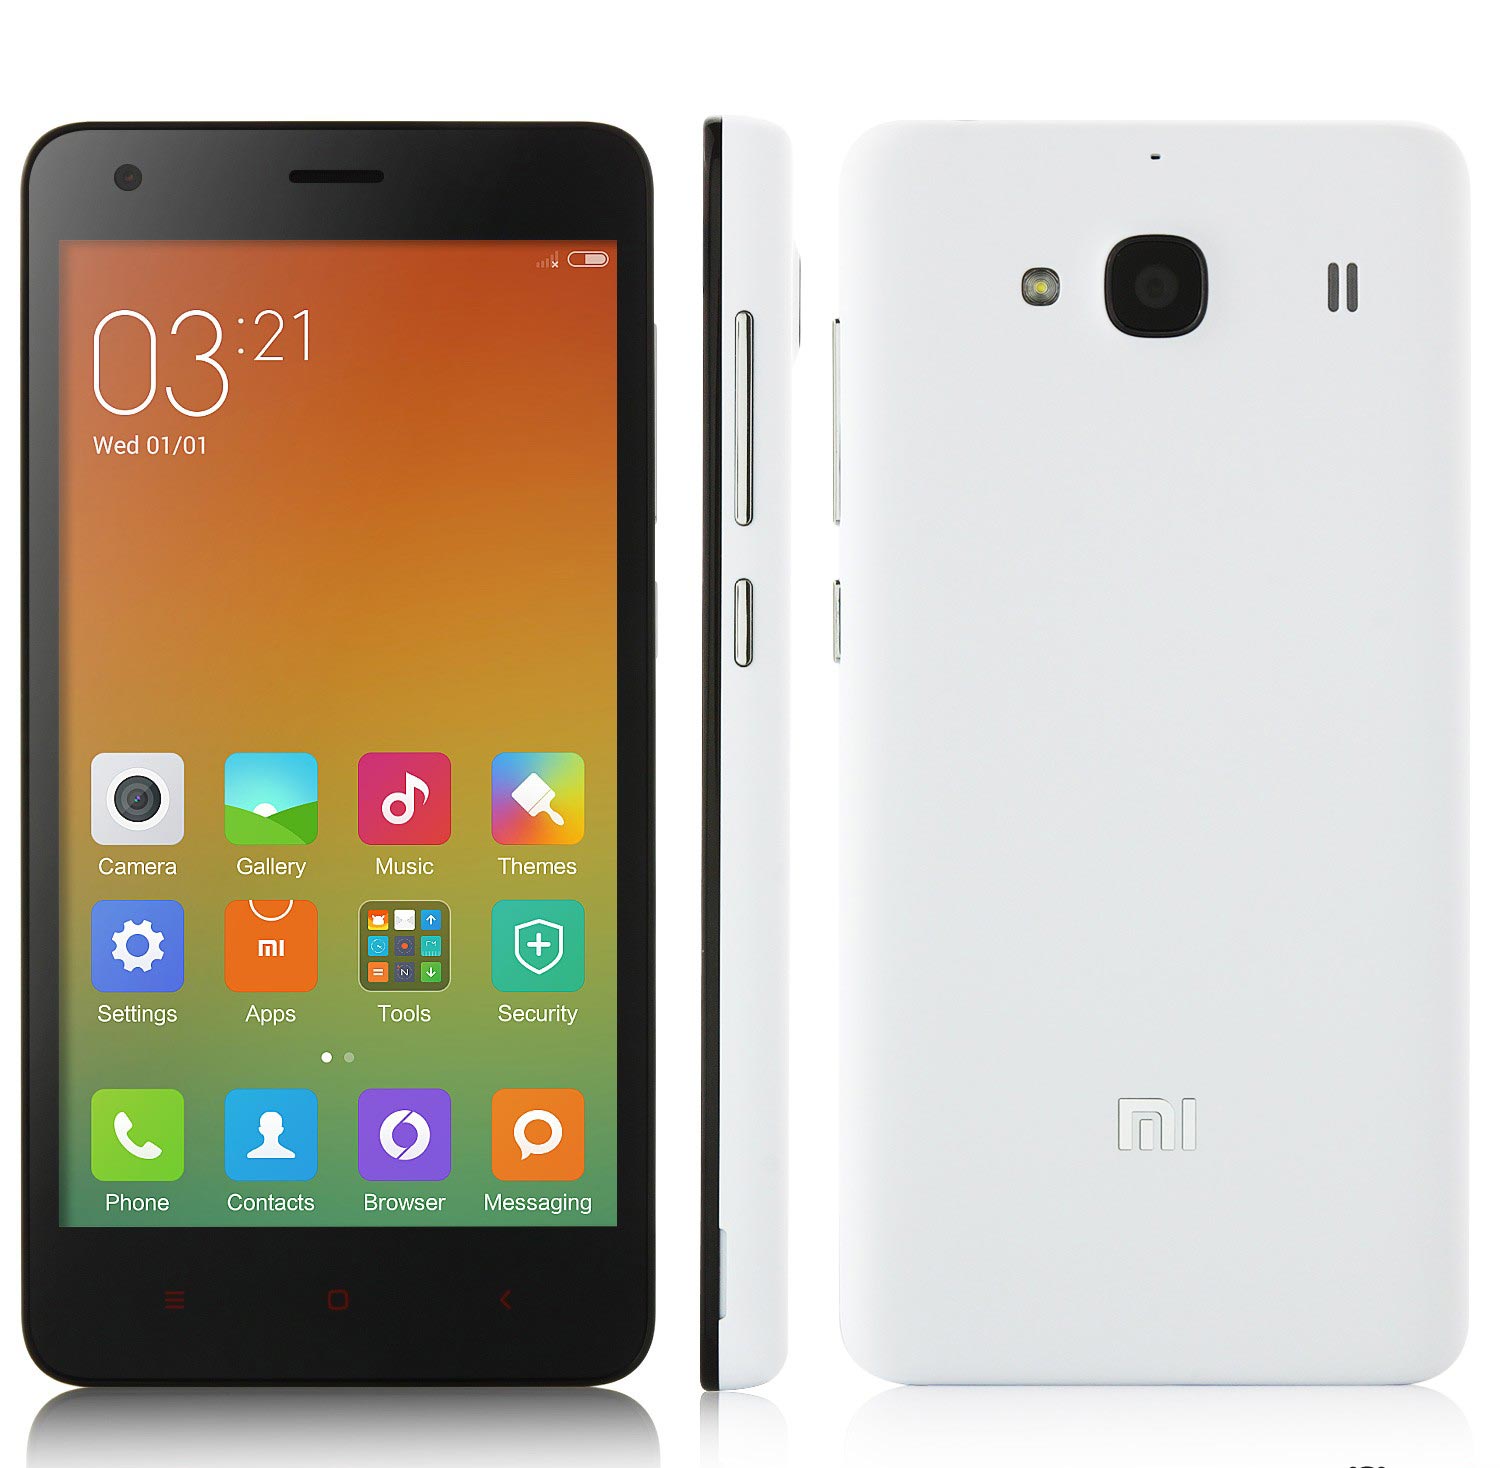 XIAOMI Redmi 2 Pro With 2G RAM For $129 : Grab The Deal